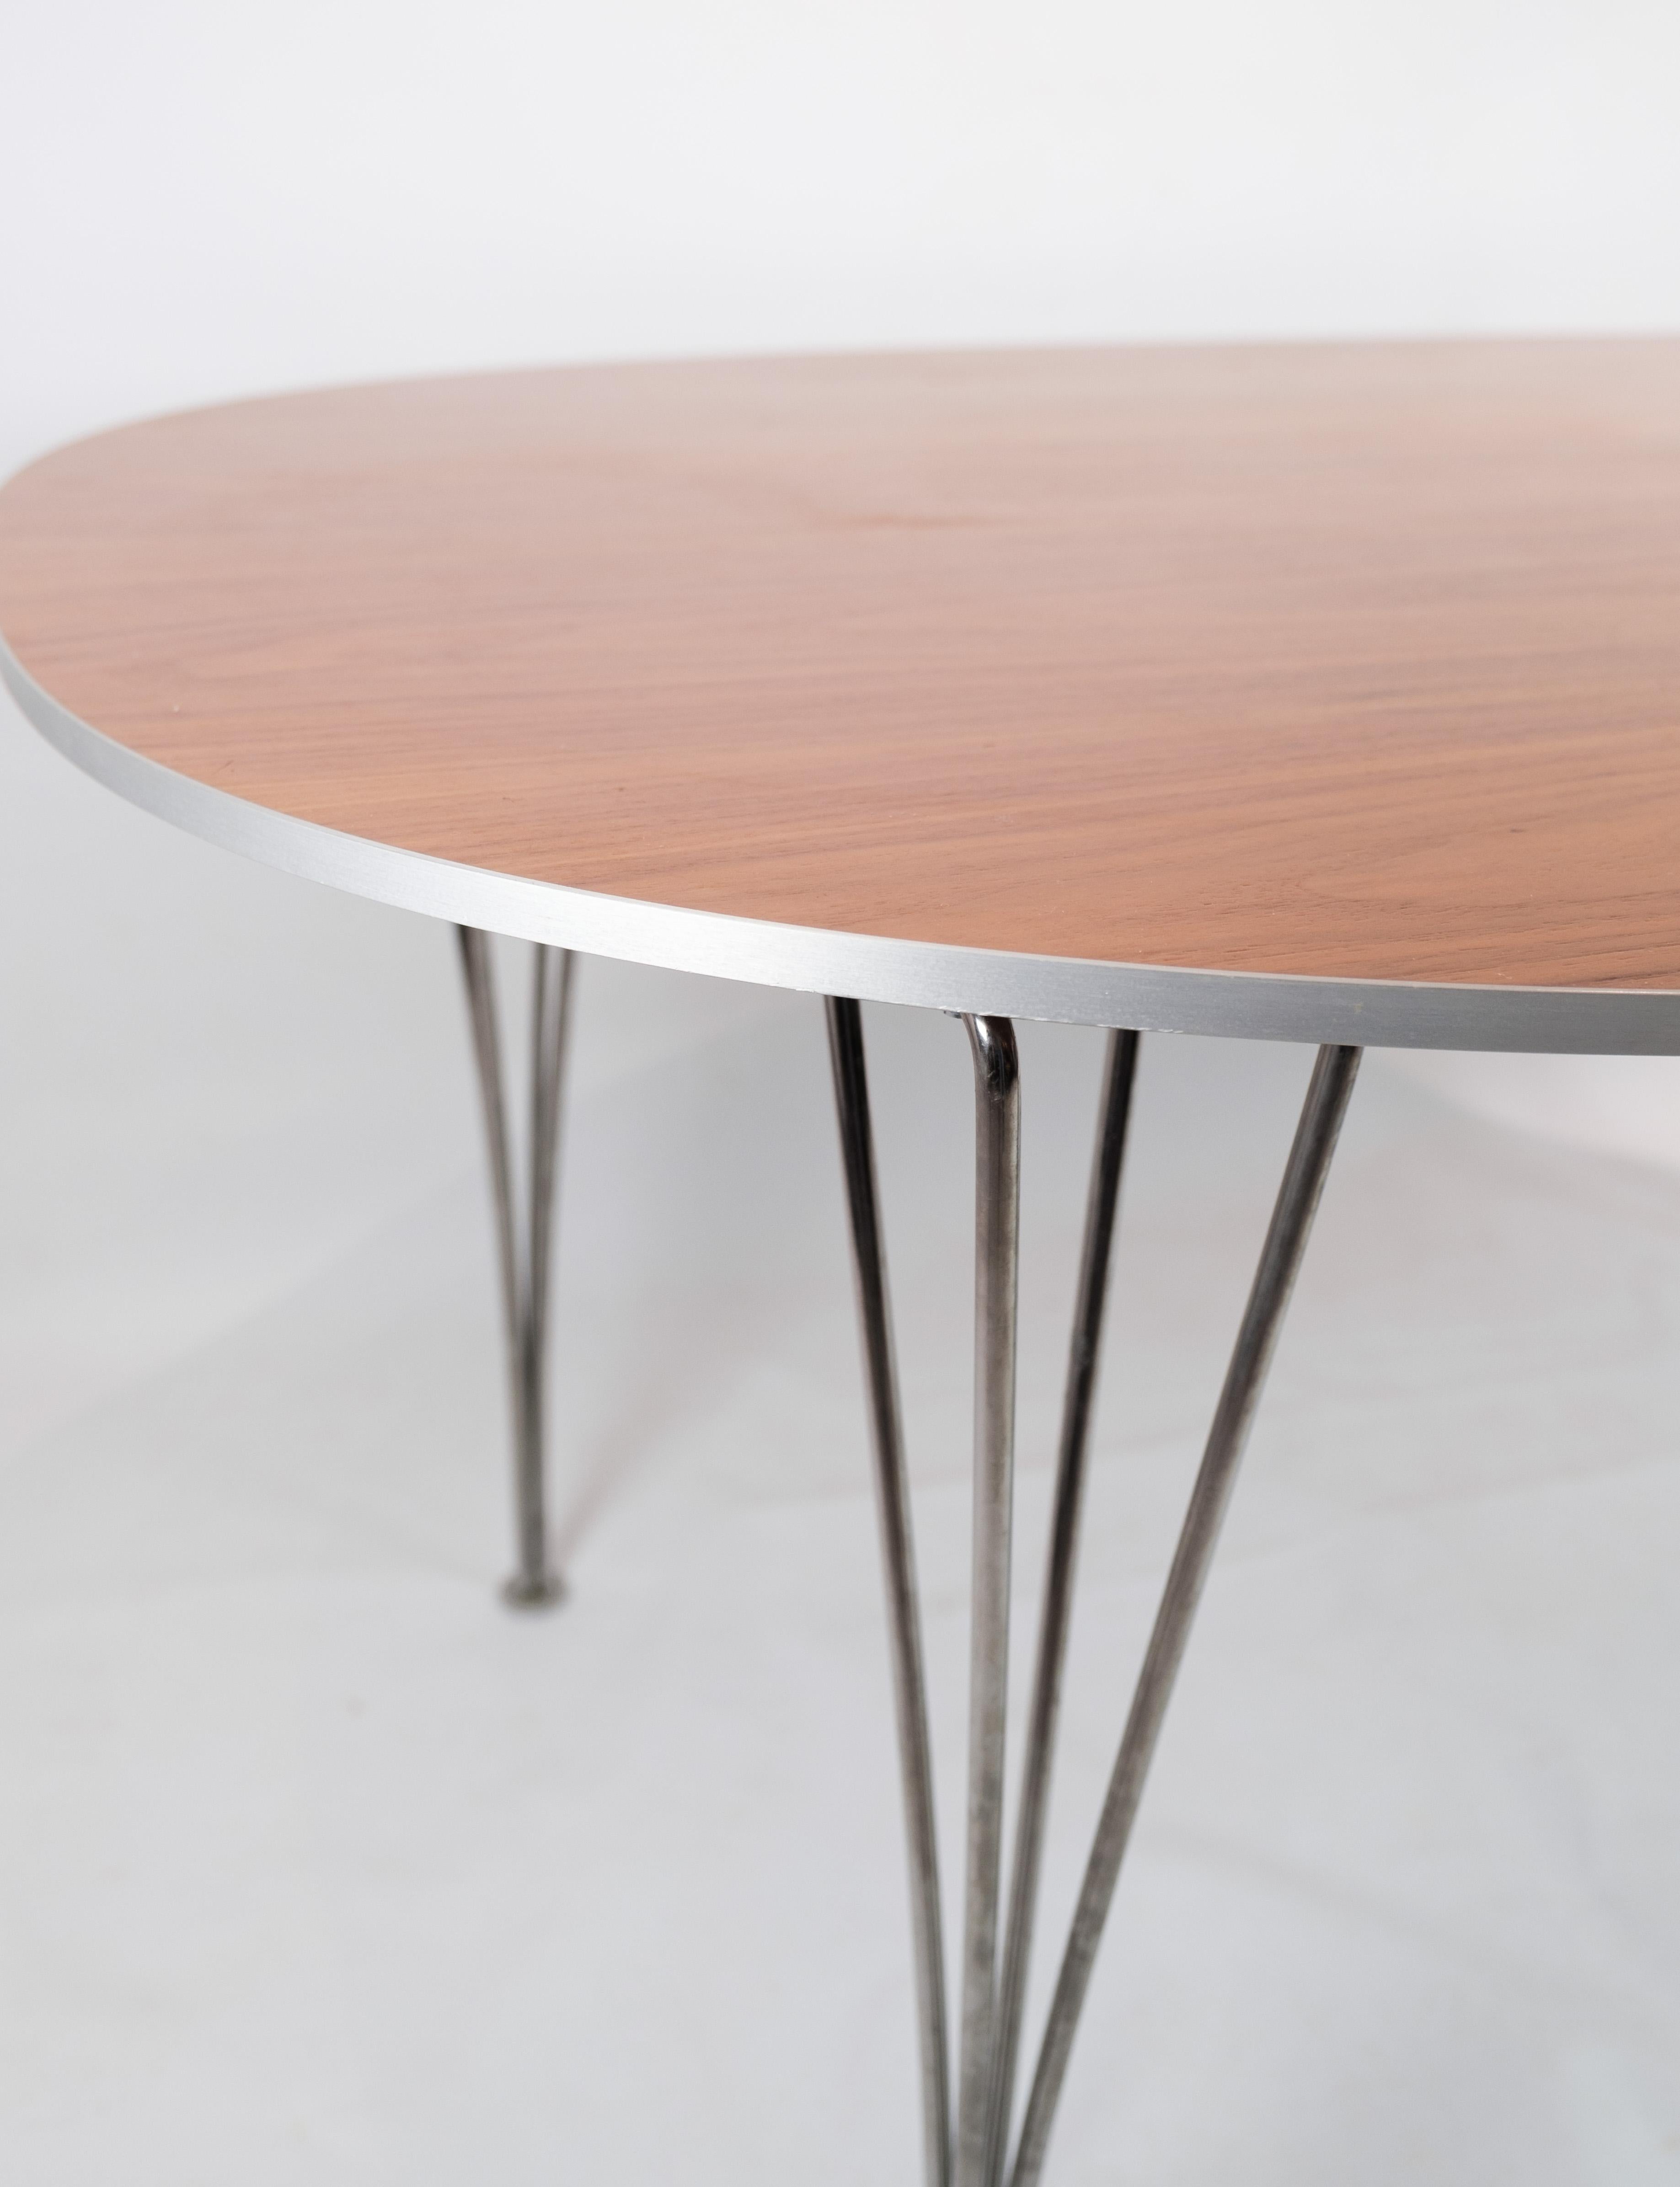 Piet Hein Table, Model B612 with Walnut Surface and Steel Legs 2